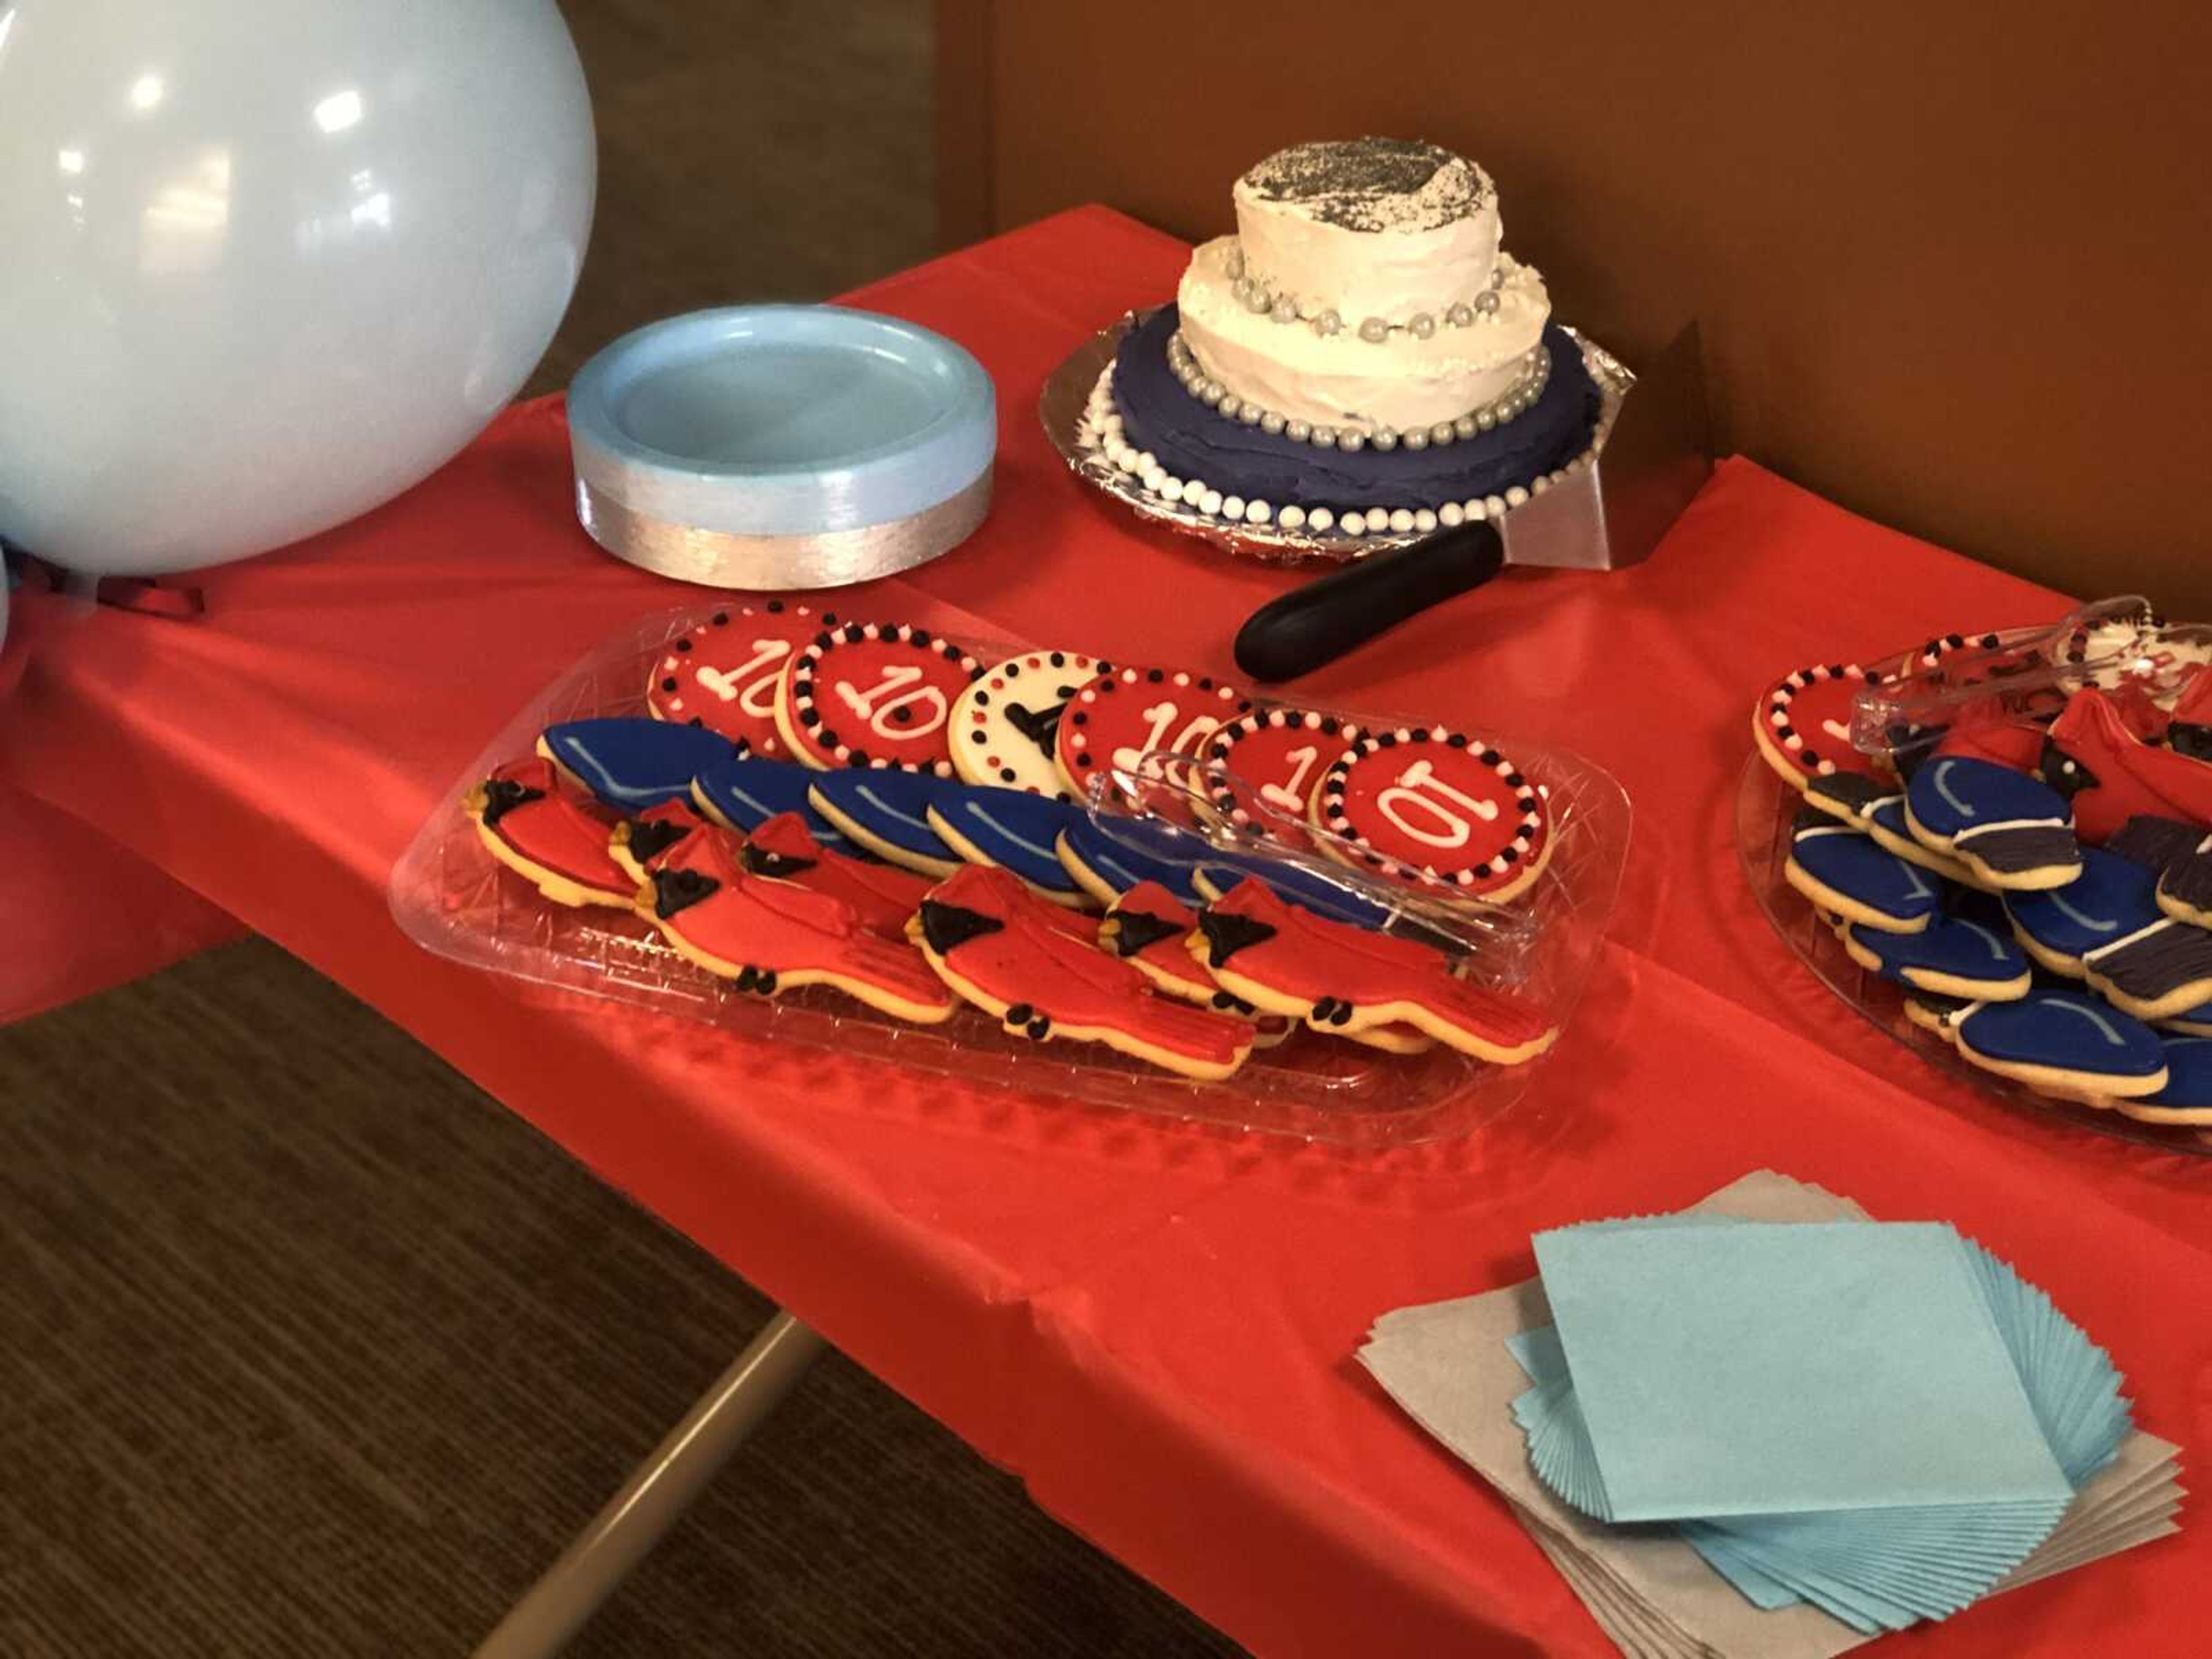 Cake, cookies and other refreshments were available for attendees. 